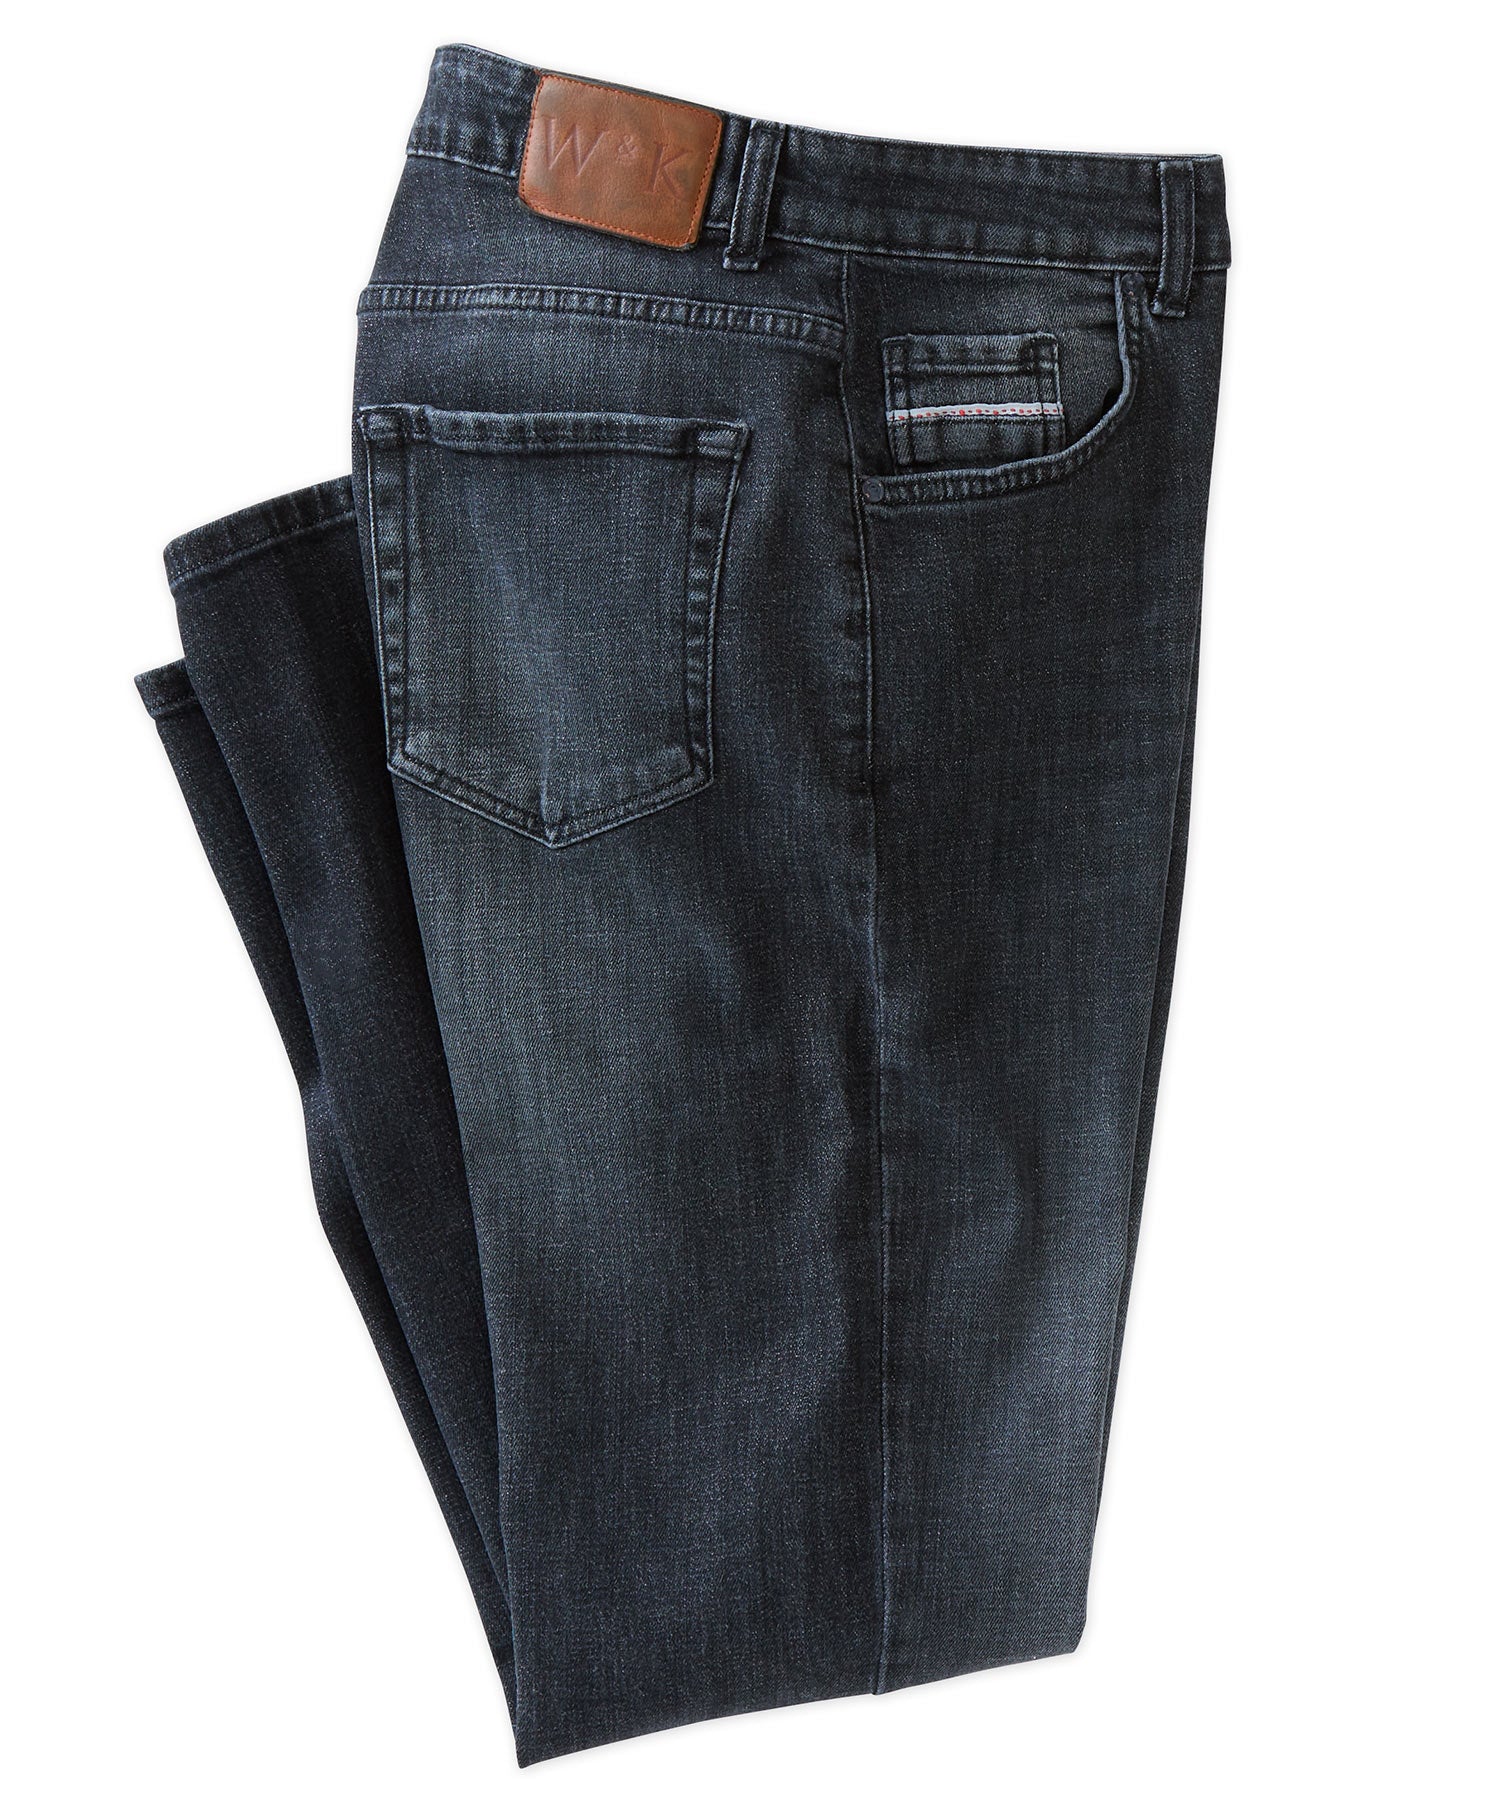 Jack of Spades High Roller Charcoal Sateen Jeans